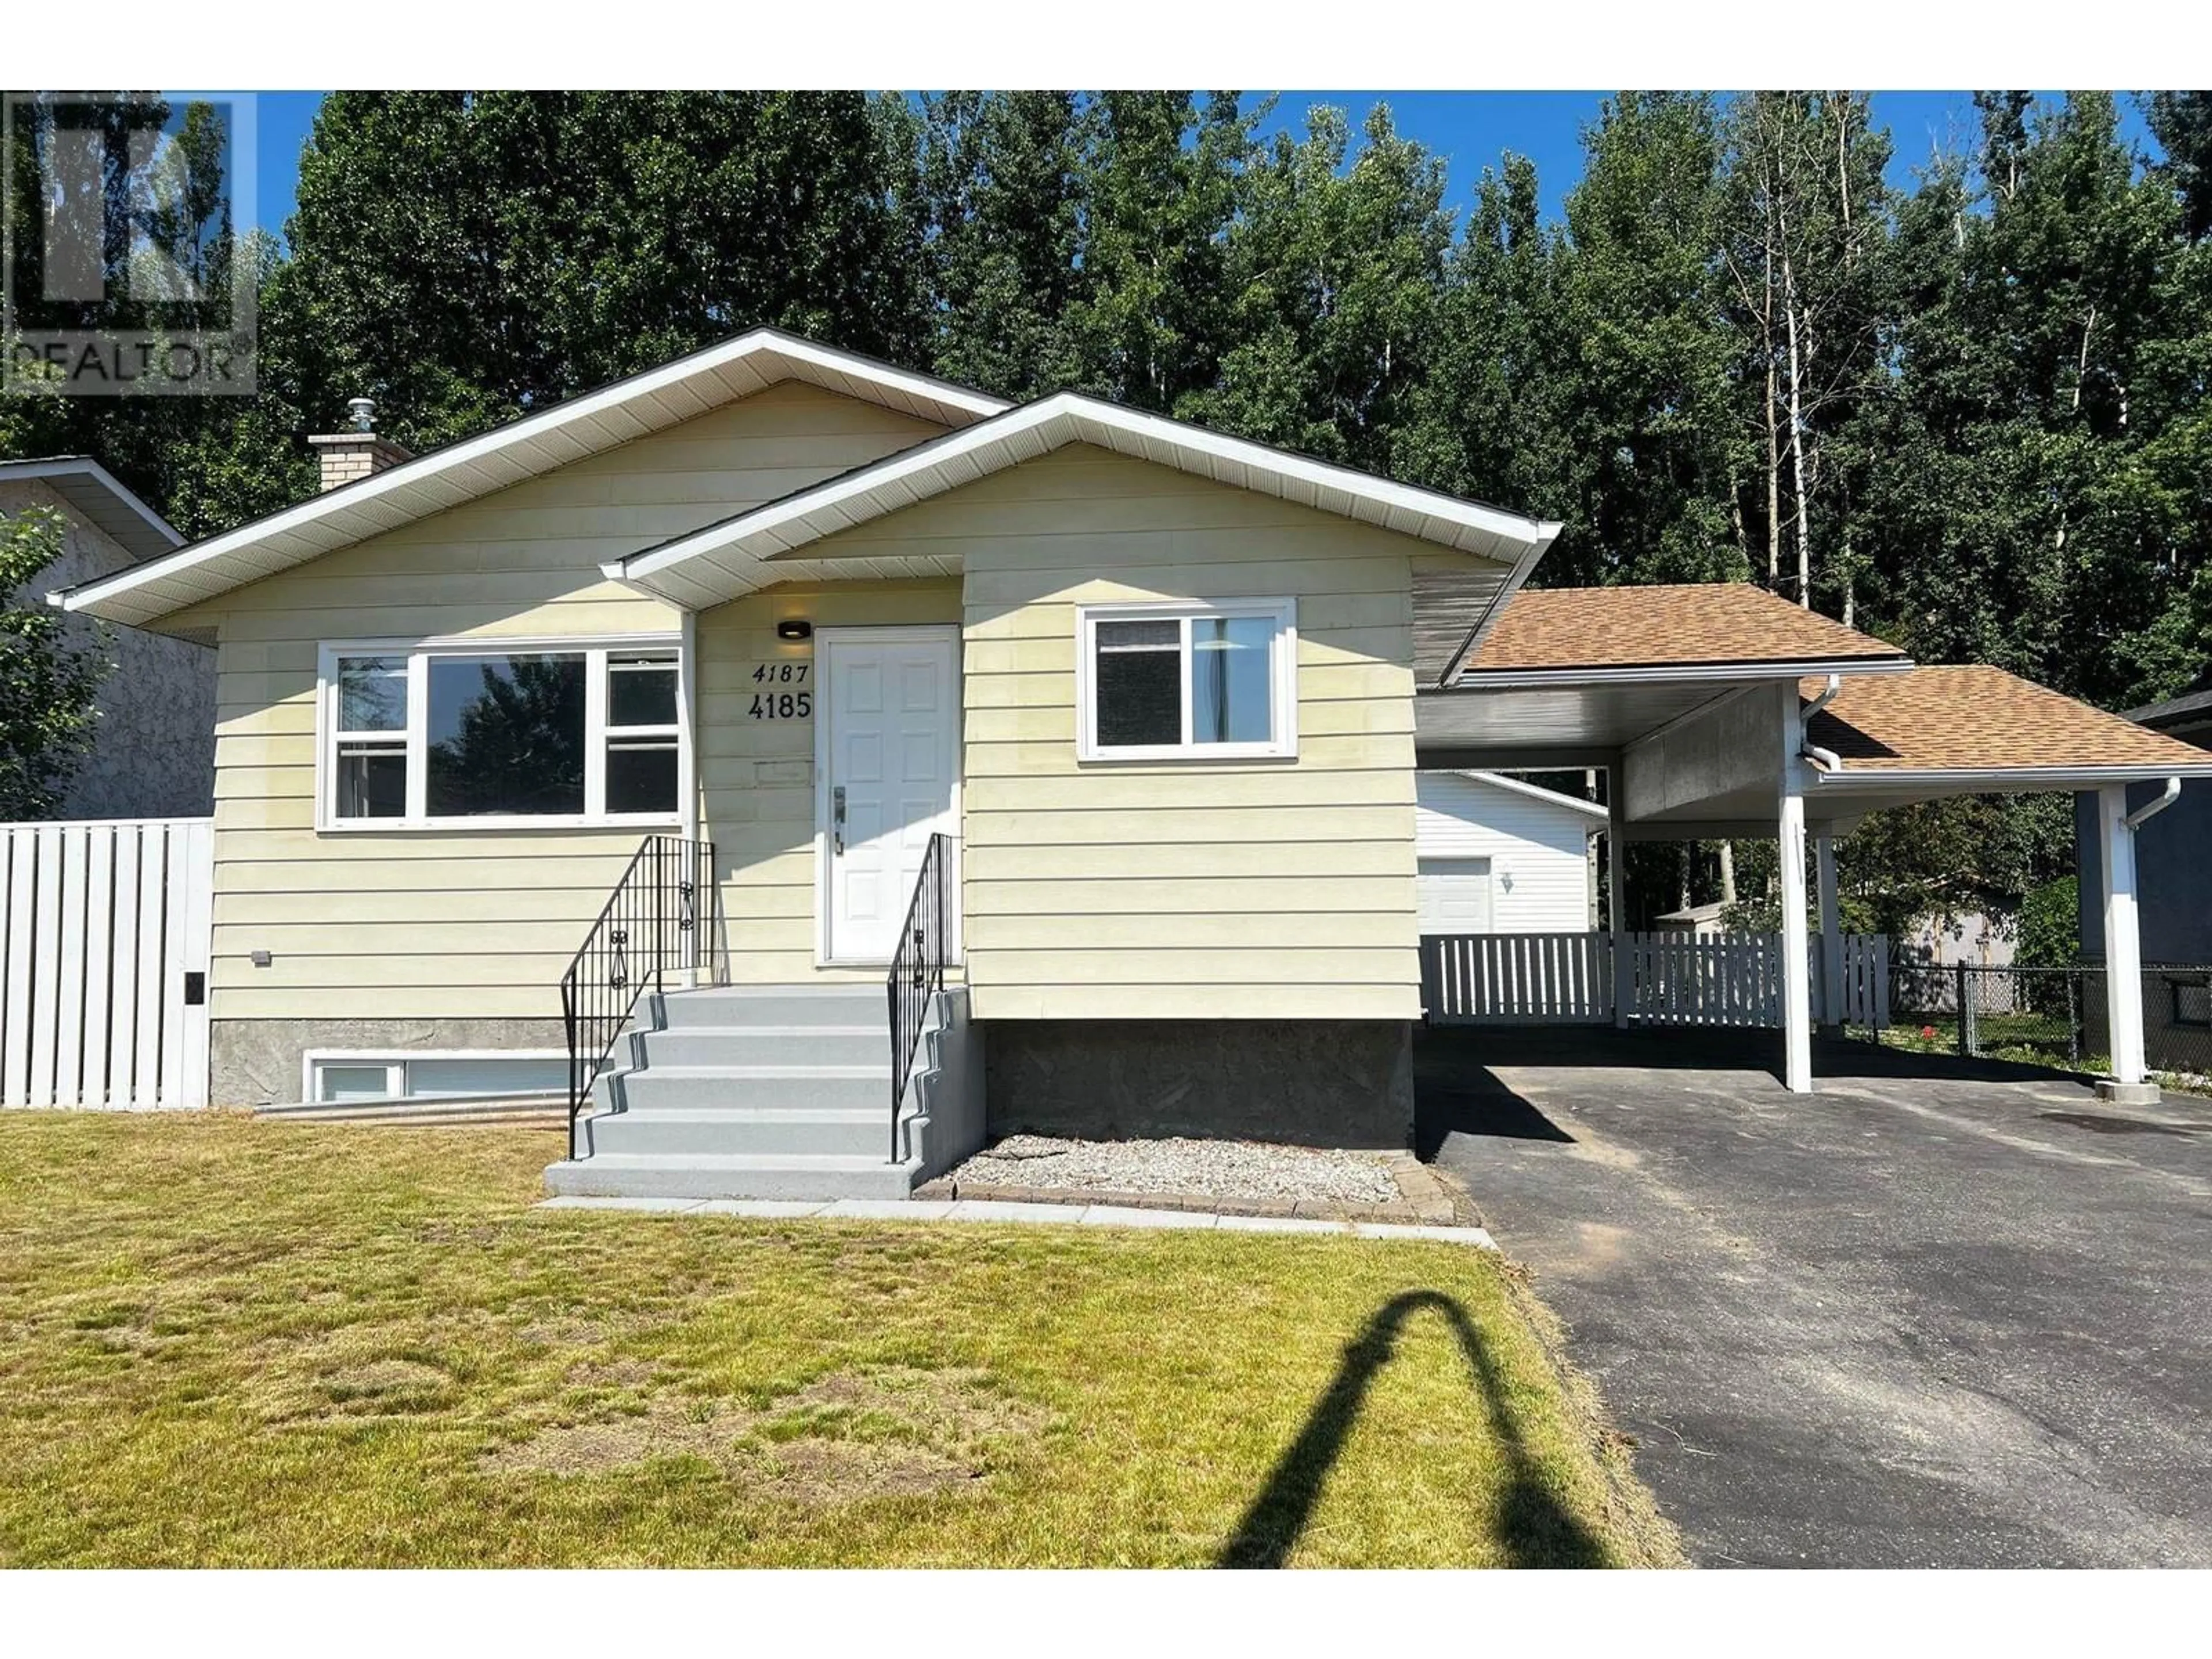 Home with vinyl exterior material for 4185 4187 BAKER ROAD, Prince George British Columbia V2N5K2